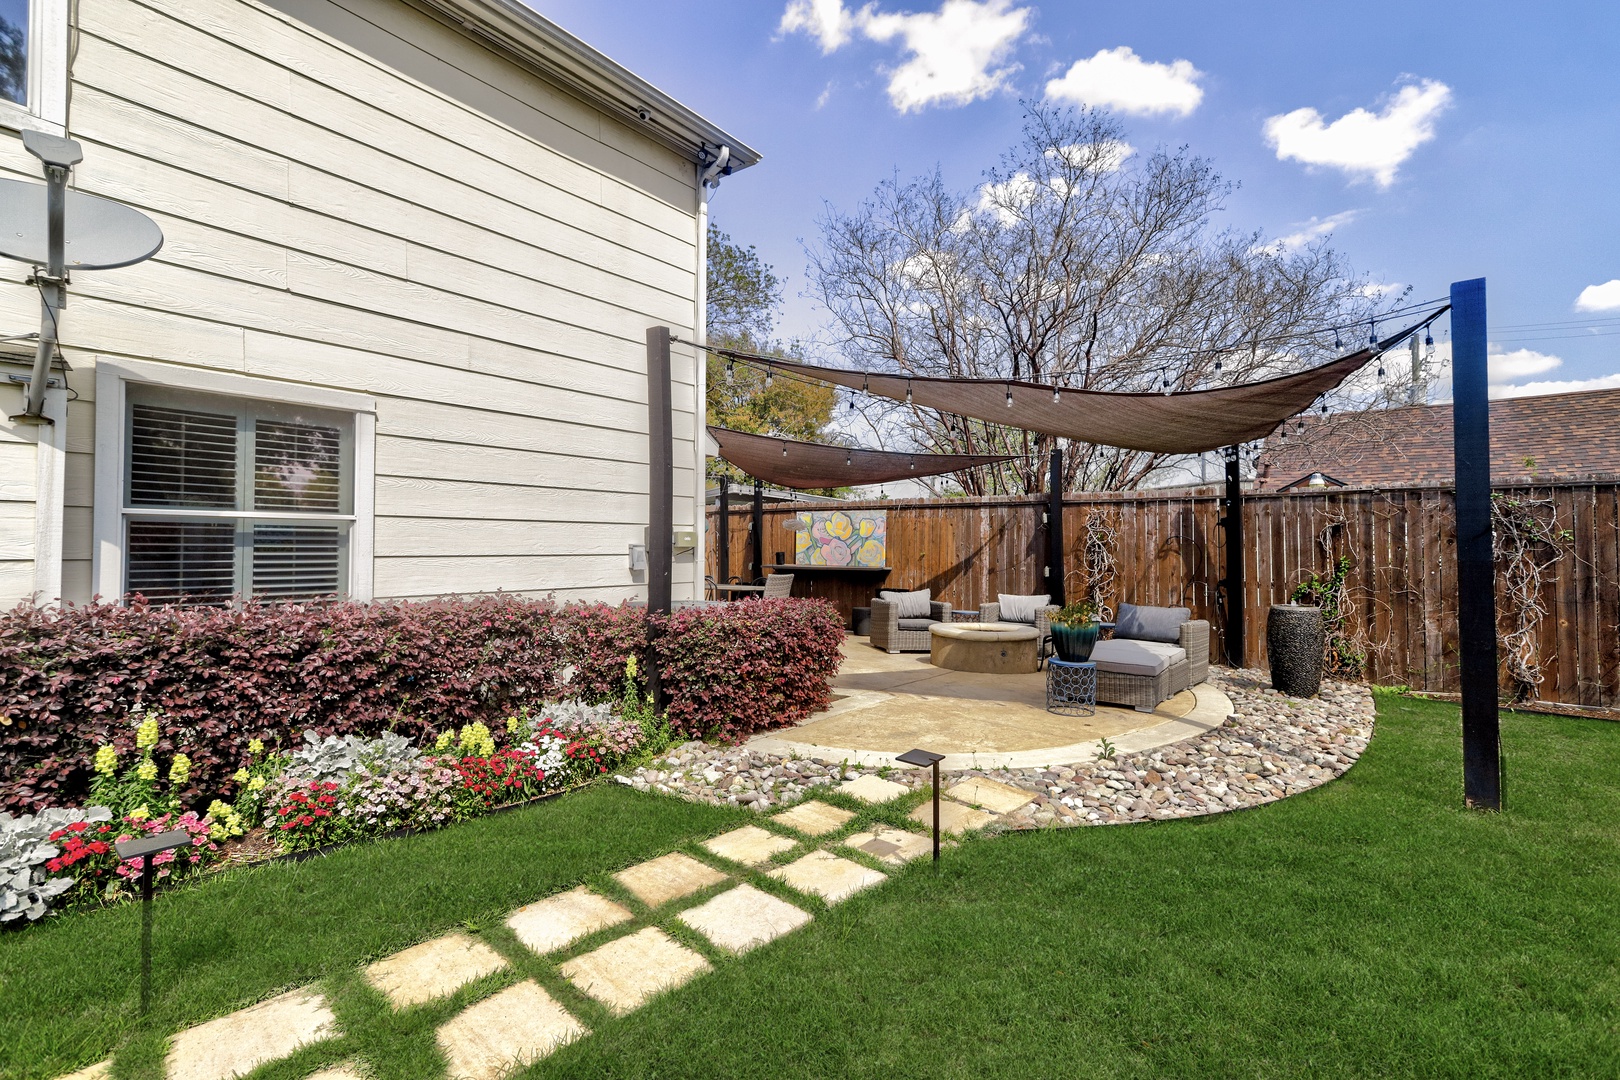 The fenced back yard oasis offers loads of space for relaxation & play